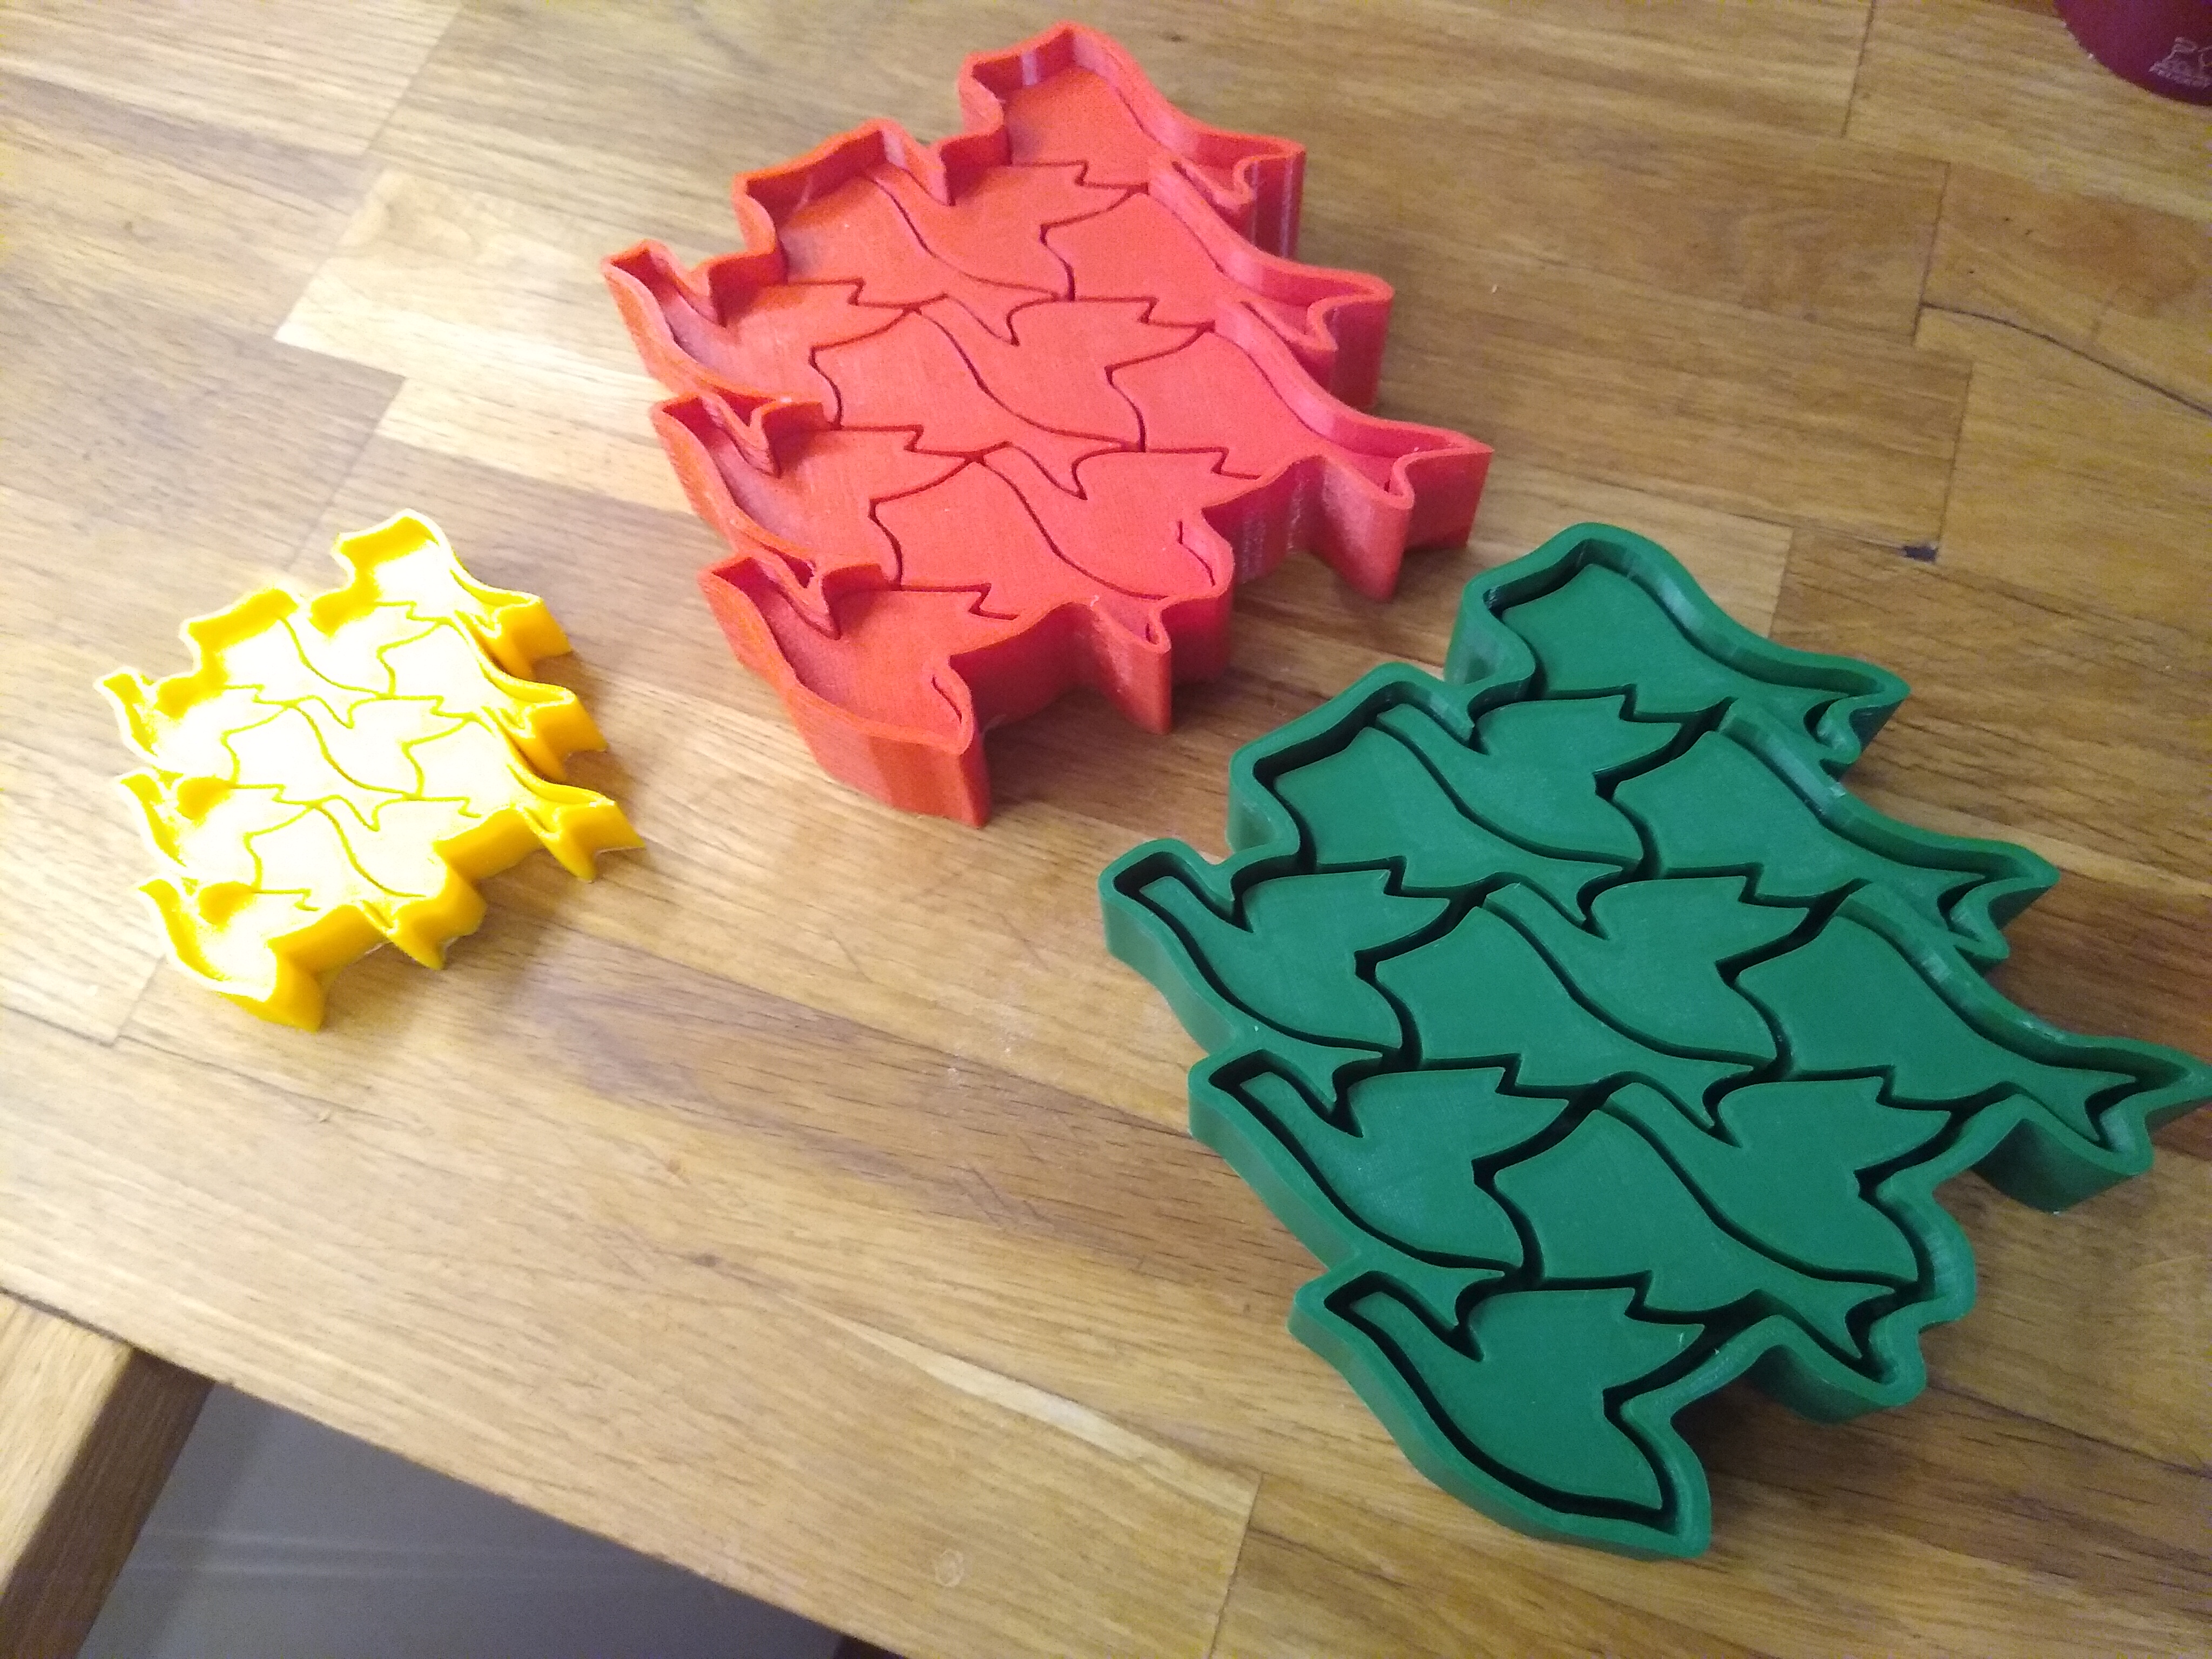 The three molds. From left to right, the first mold (yellow), second (red), and third (green)